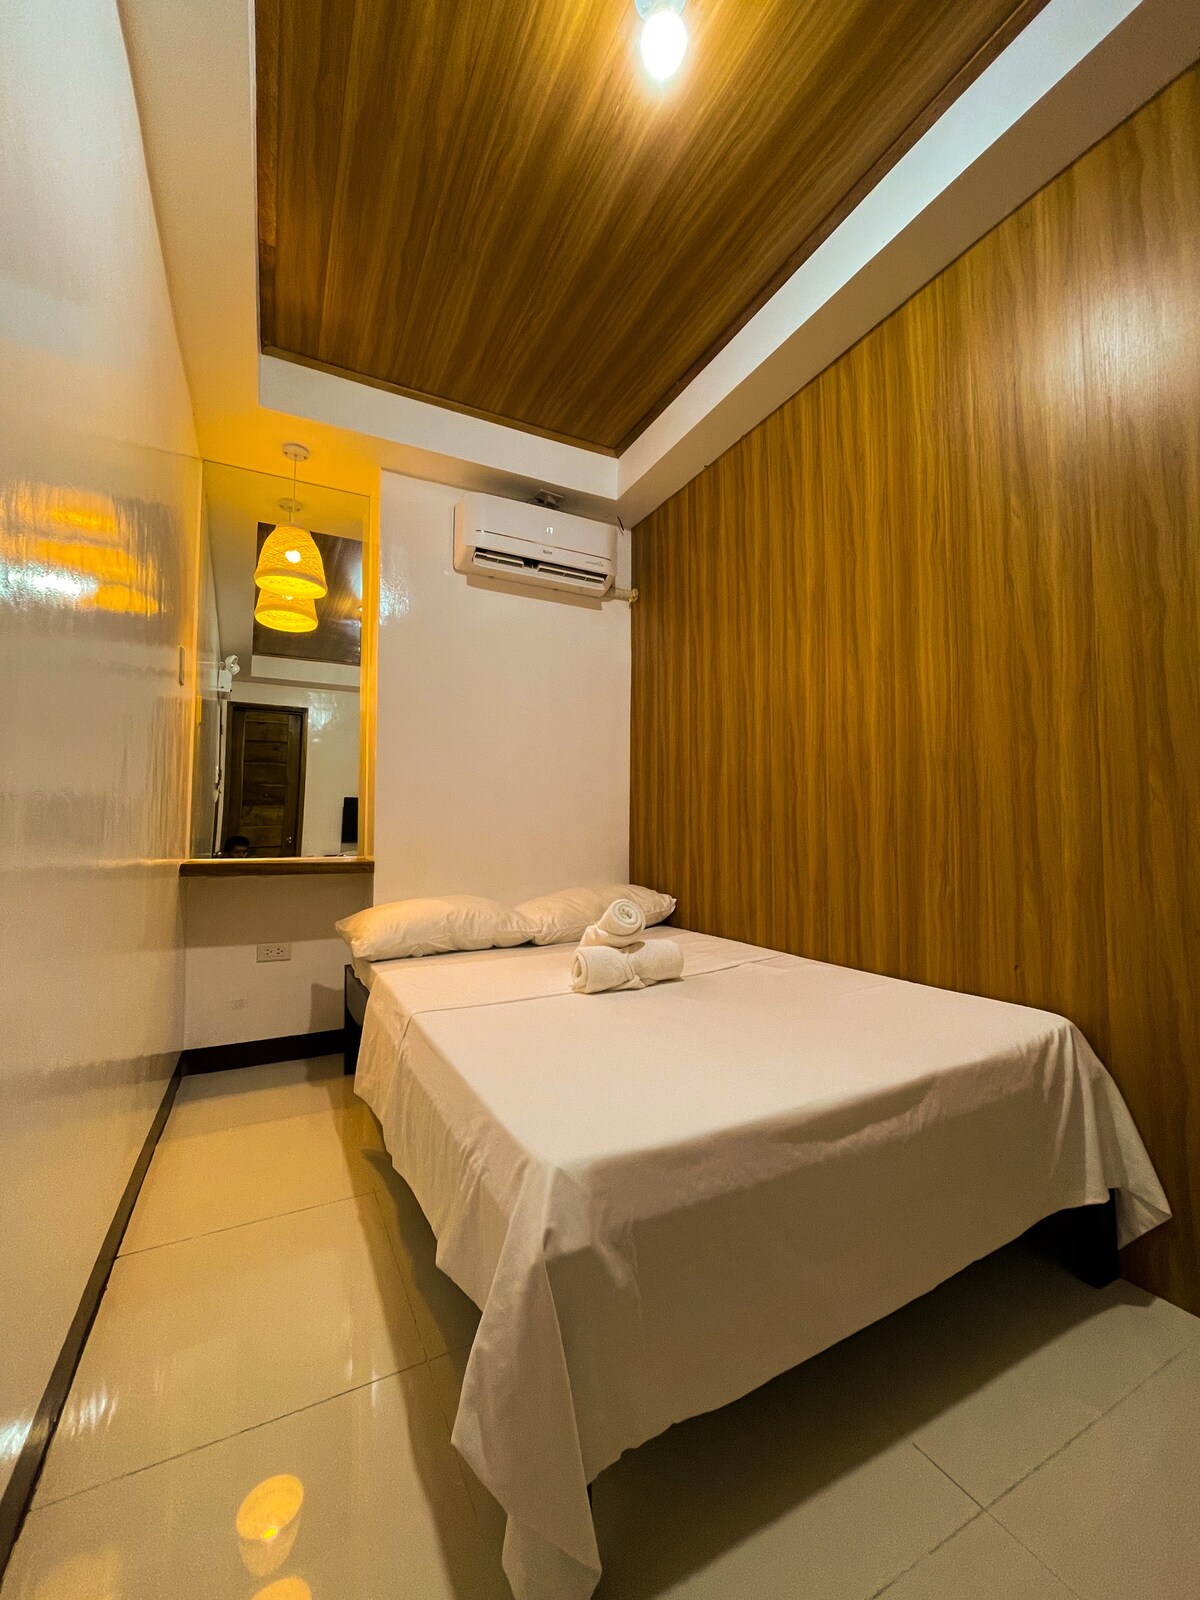 Leila Pension House - Deluxe (2 pax) 6 hours.